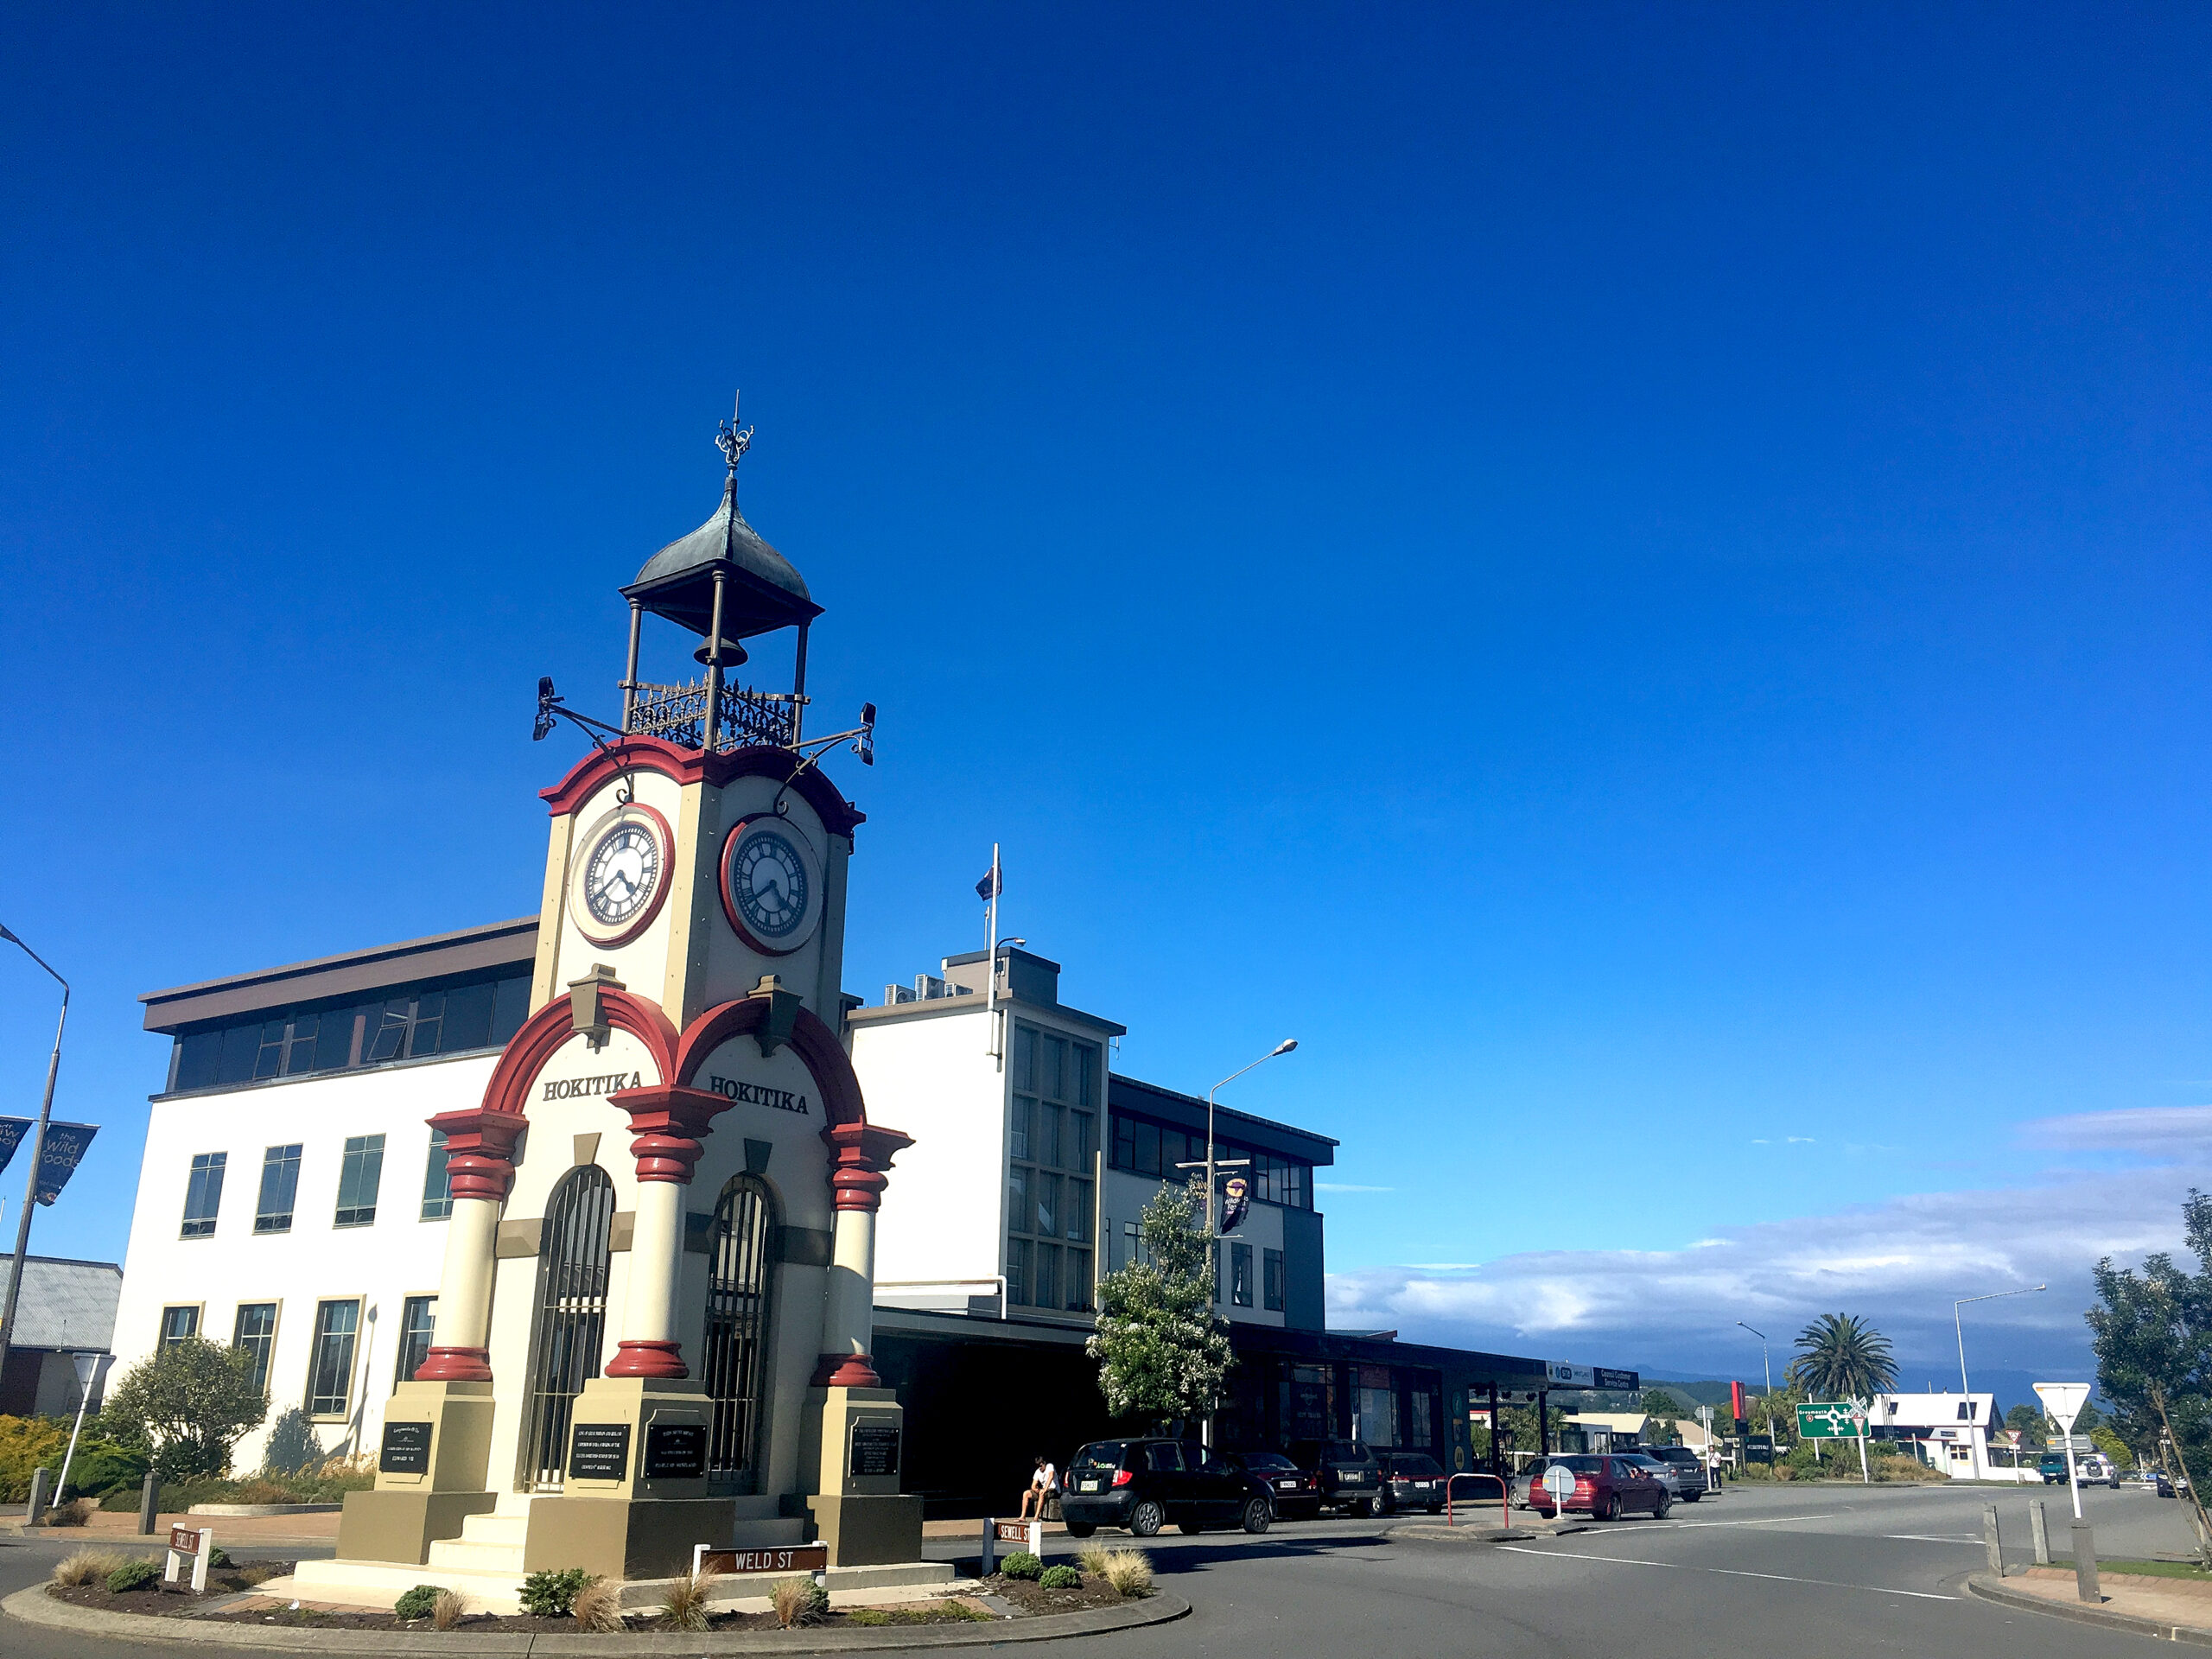 An iconic clocktower sits in the middle of Hokitika, New Zealand.